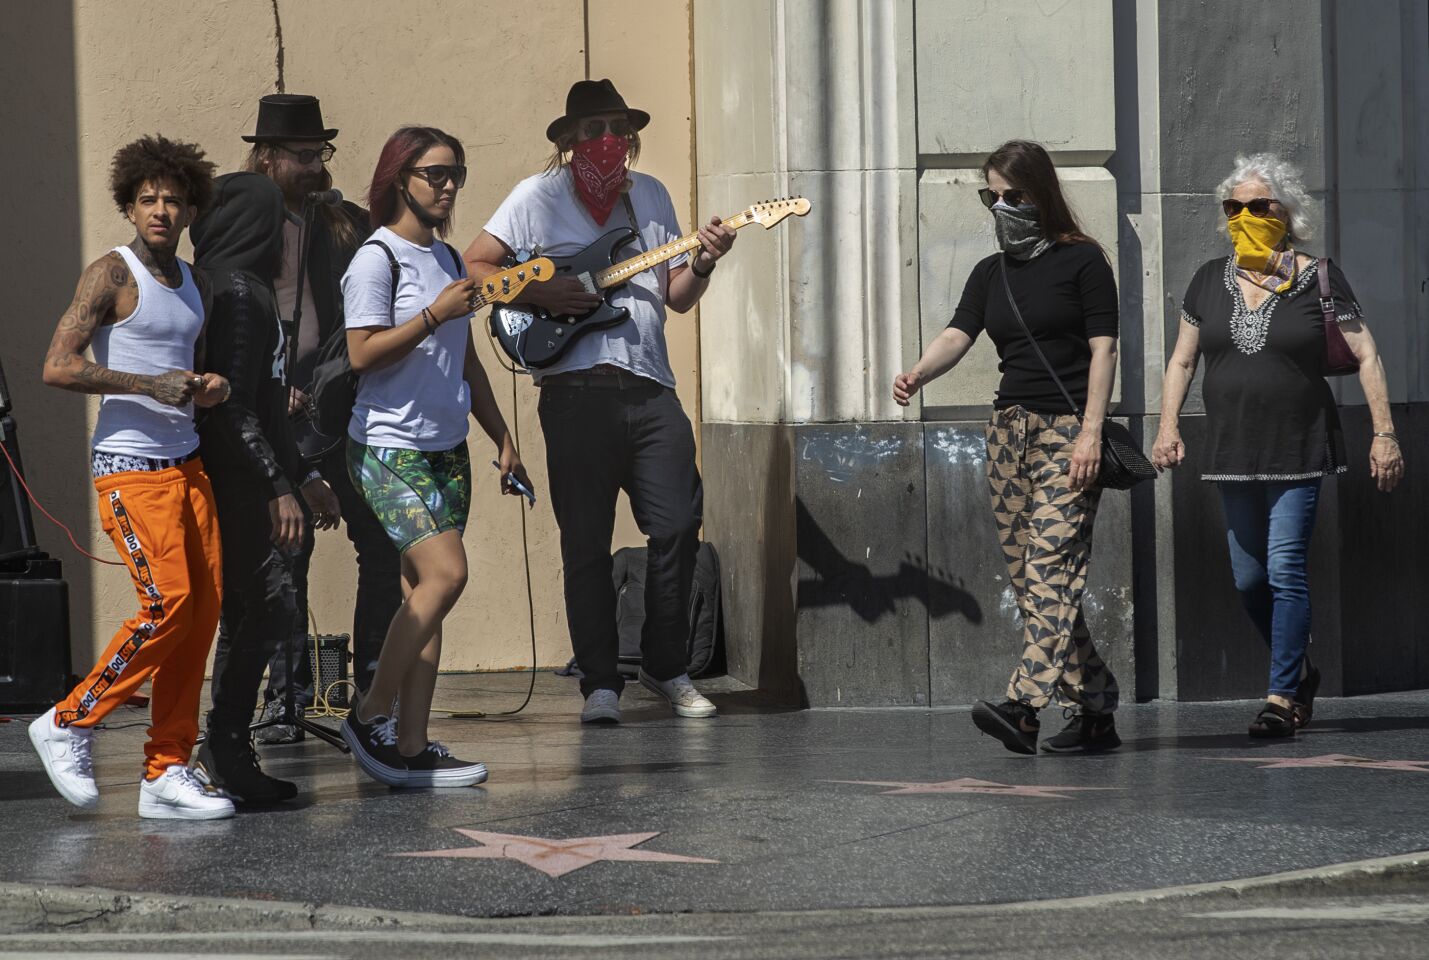 Pedestrians, some with face coverings, some without, walk past musicians at Hollywood Boulevard and Highland Avenue.